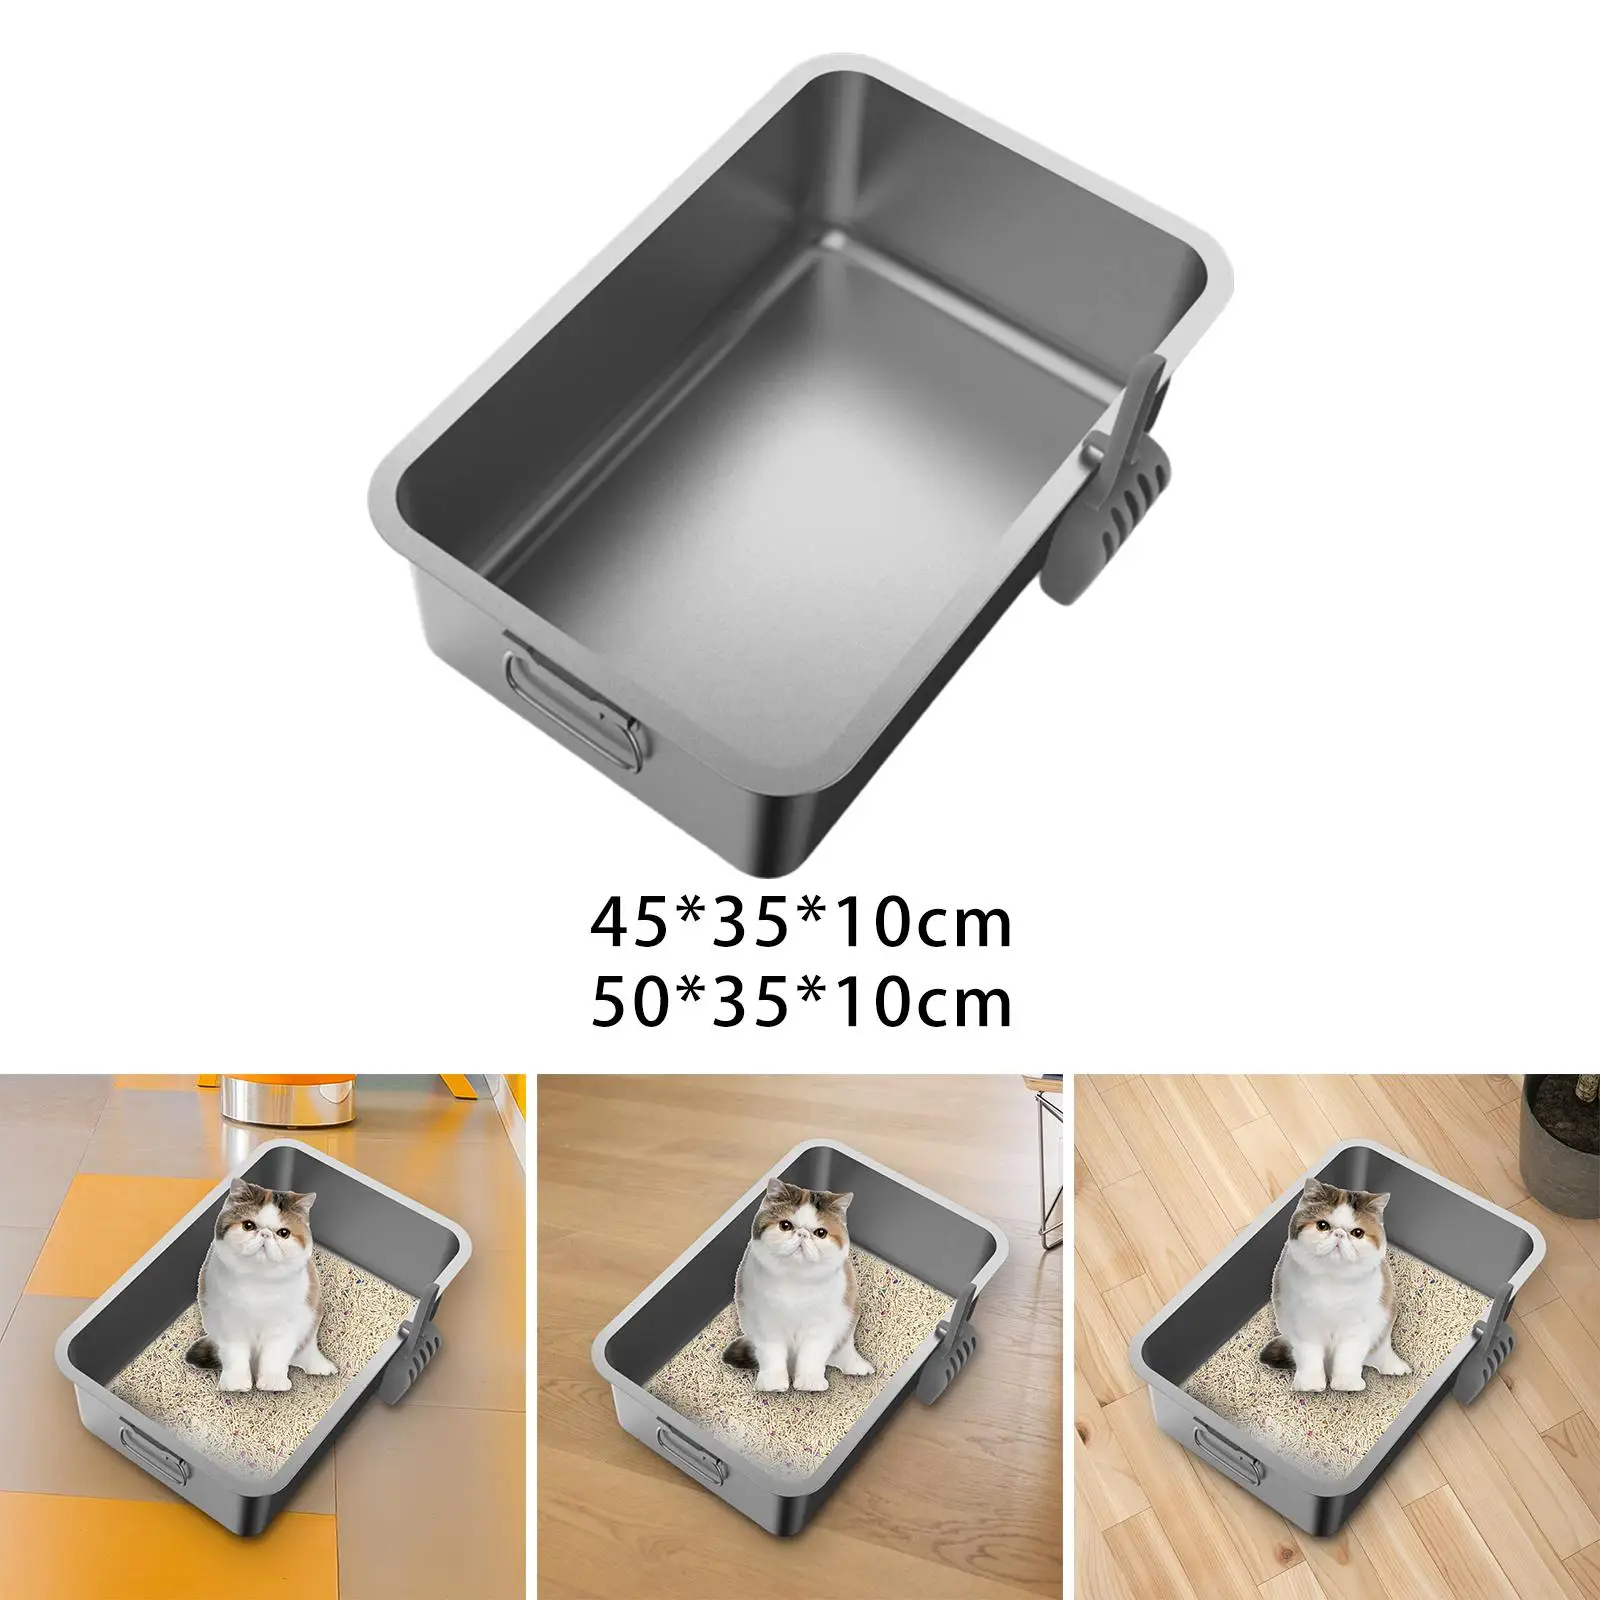 Rabbit Cat Litter Container Holder Stainless Steel Rust Free with Side Carrying Handle Sturdy Durable Smooth Surface